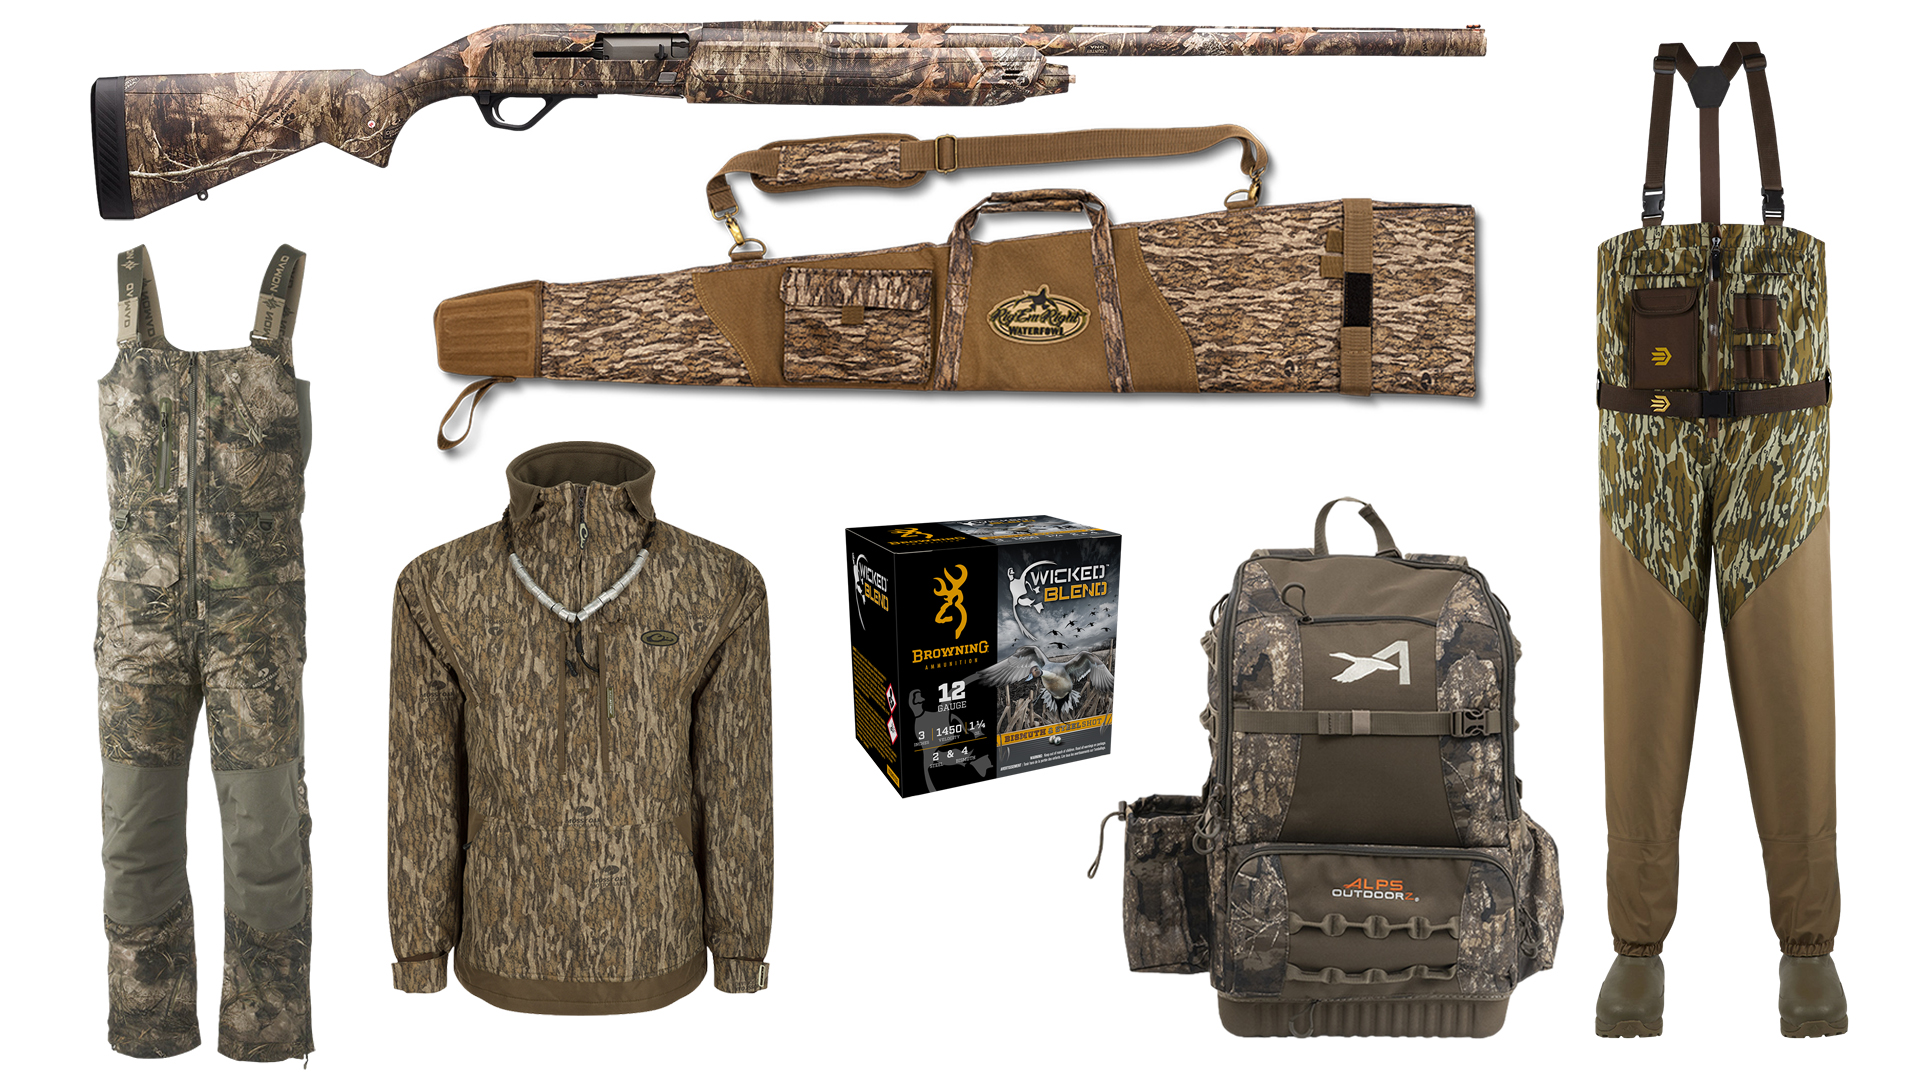 2021's best new hunting gear: 7 slick accessories for days afield